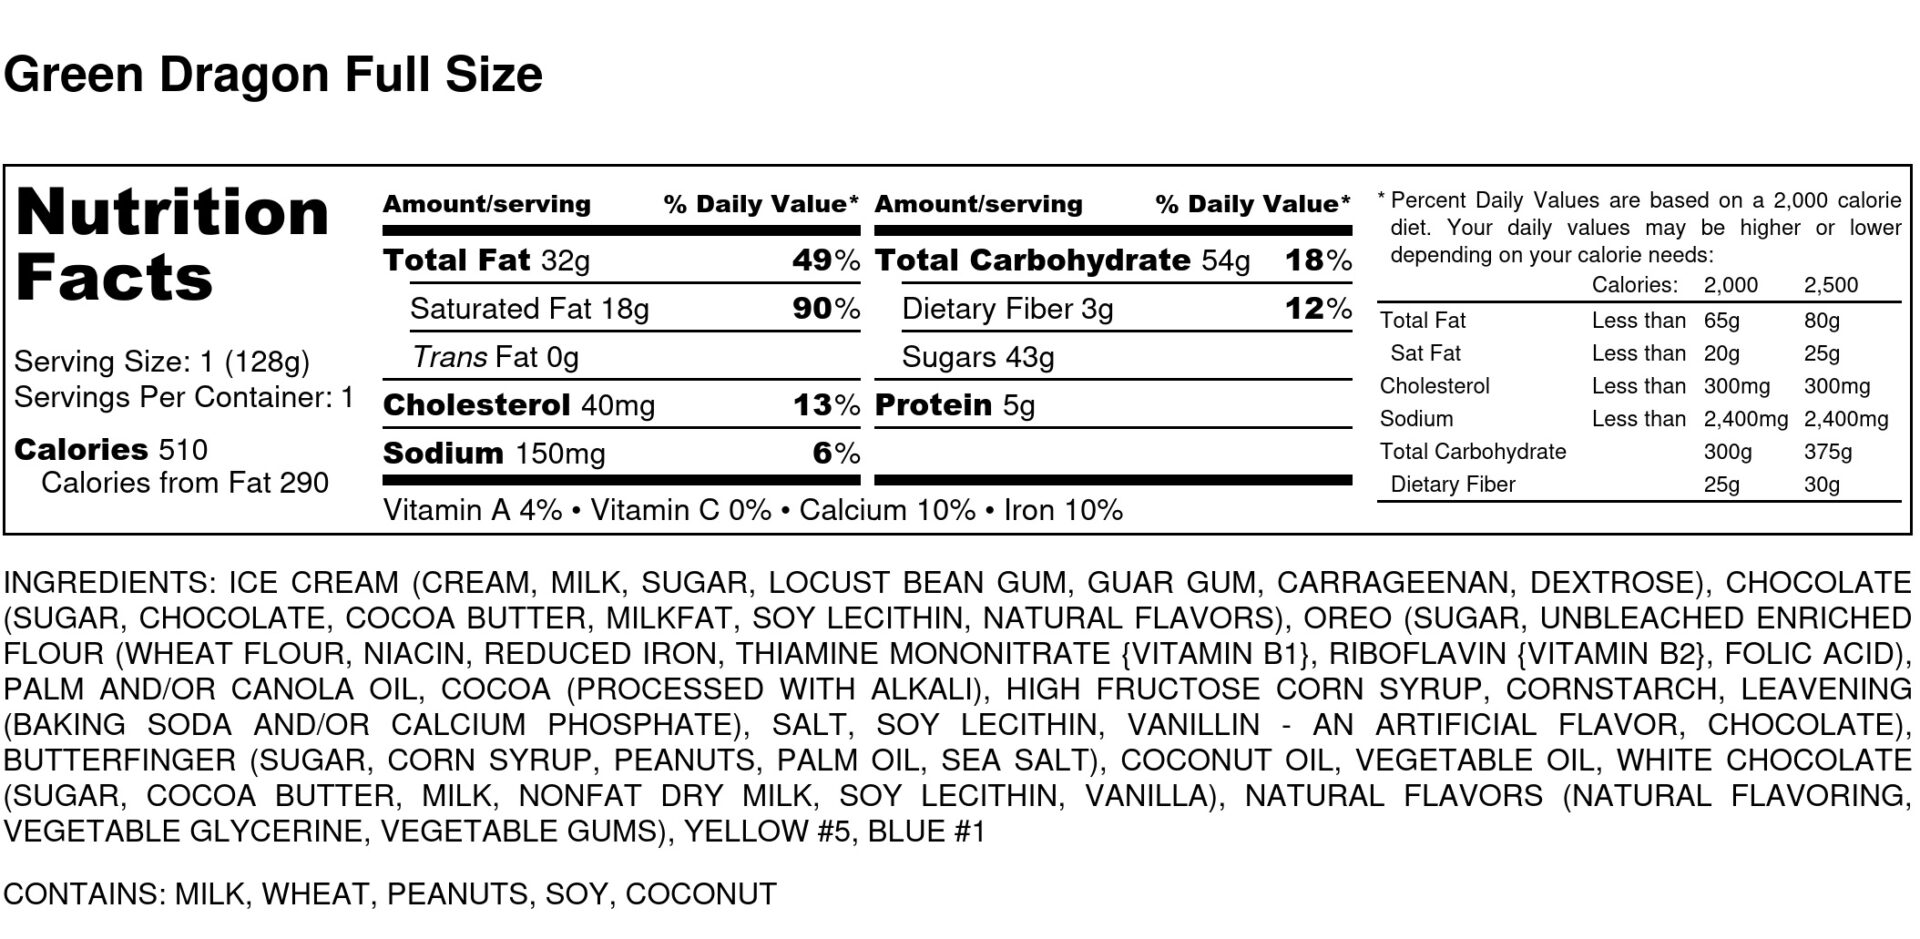 Green Dragon Full Size Nutrition Label 1 scaled